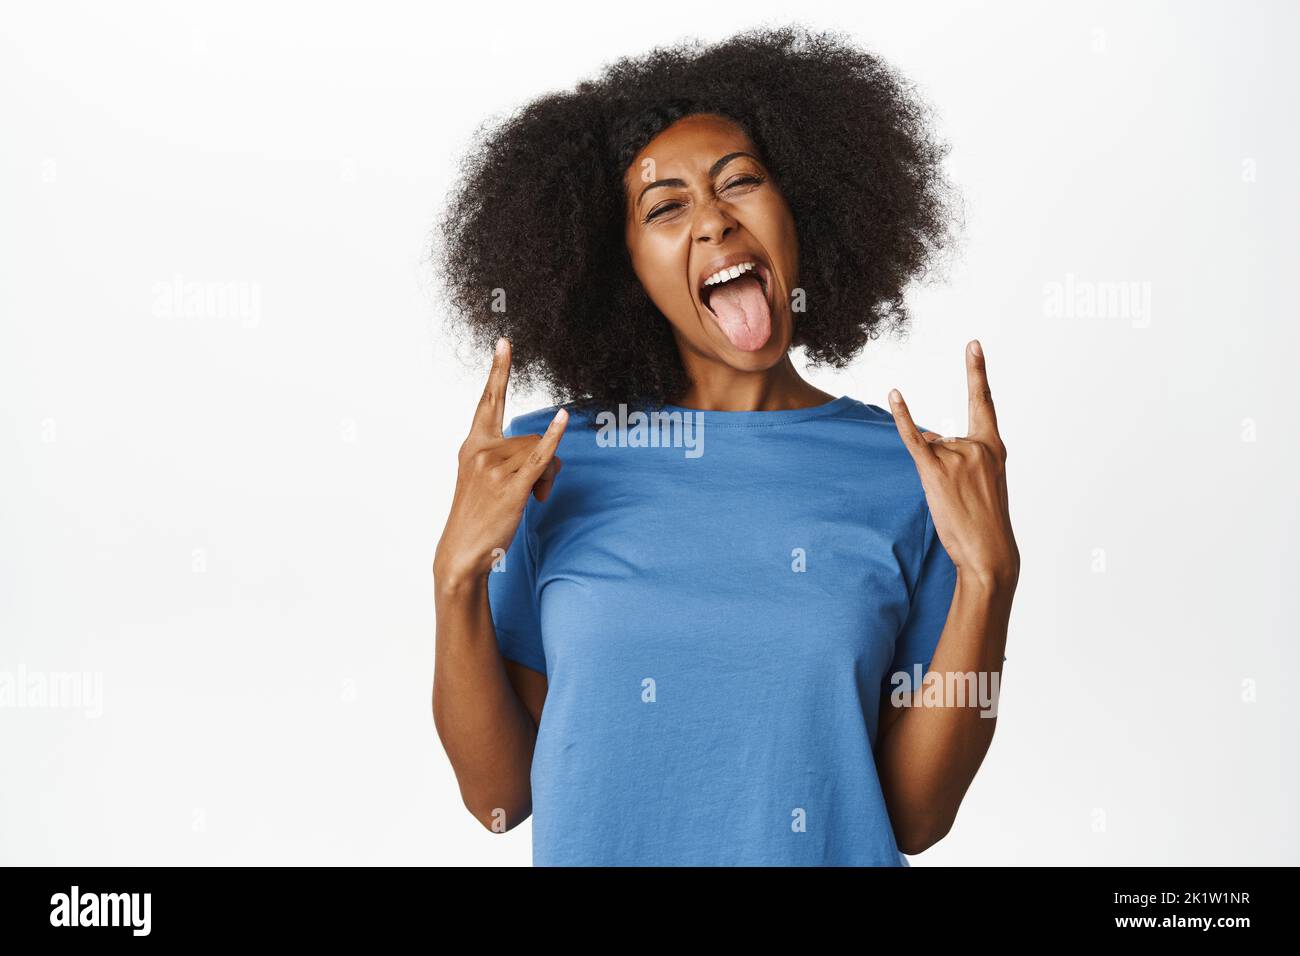 Enthusiastic Black female model, showing rock on, heavy metal party gesture, having fun, enjoying smth awesome, standing in blue t-shirt over white ba Stock Photo